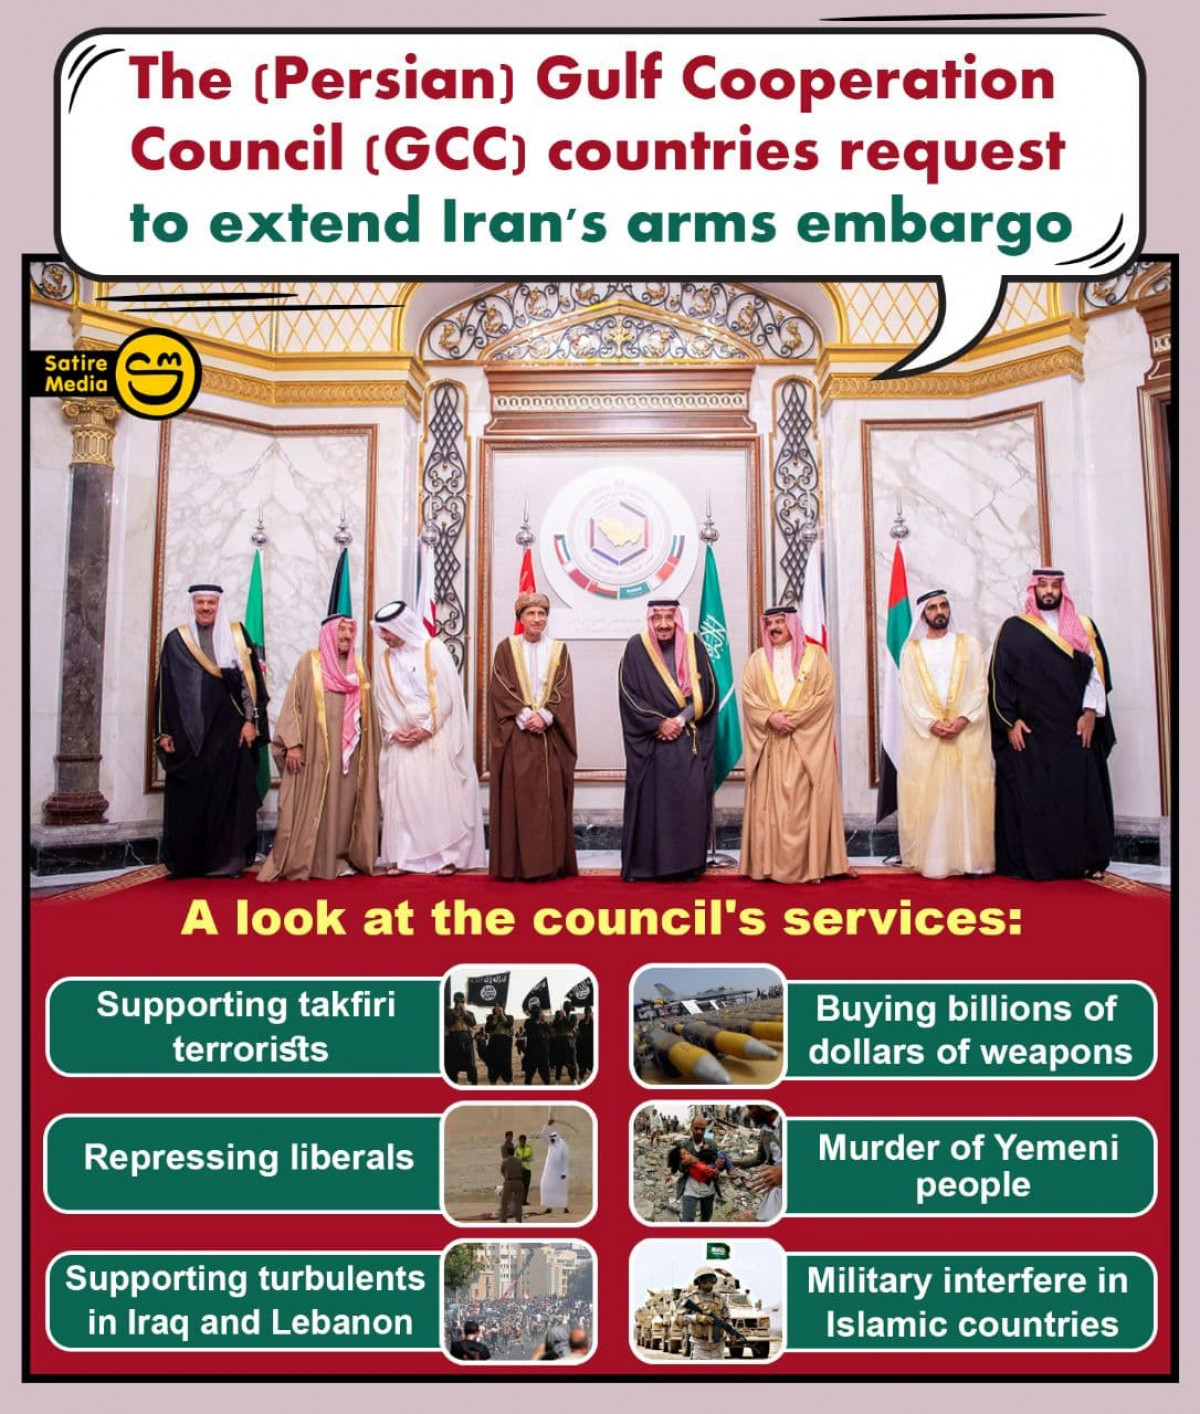 The (Persian) Gulf Cooperation Council (GCC) countries request to extend Iran's arms embargo